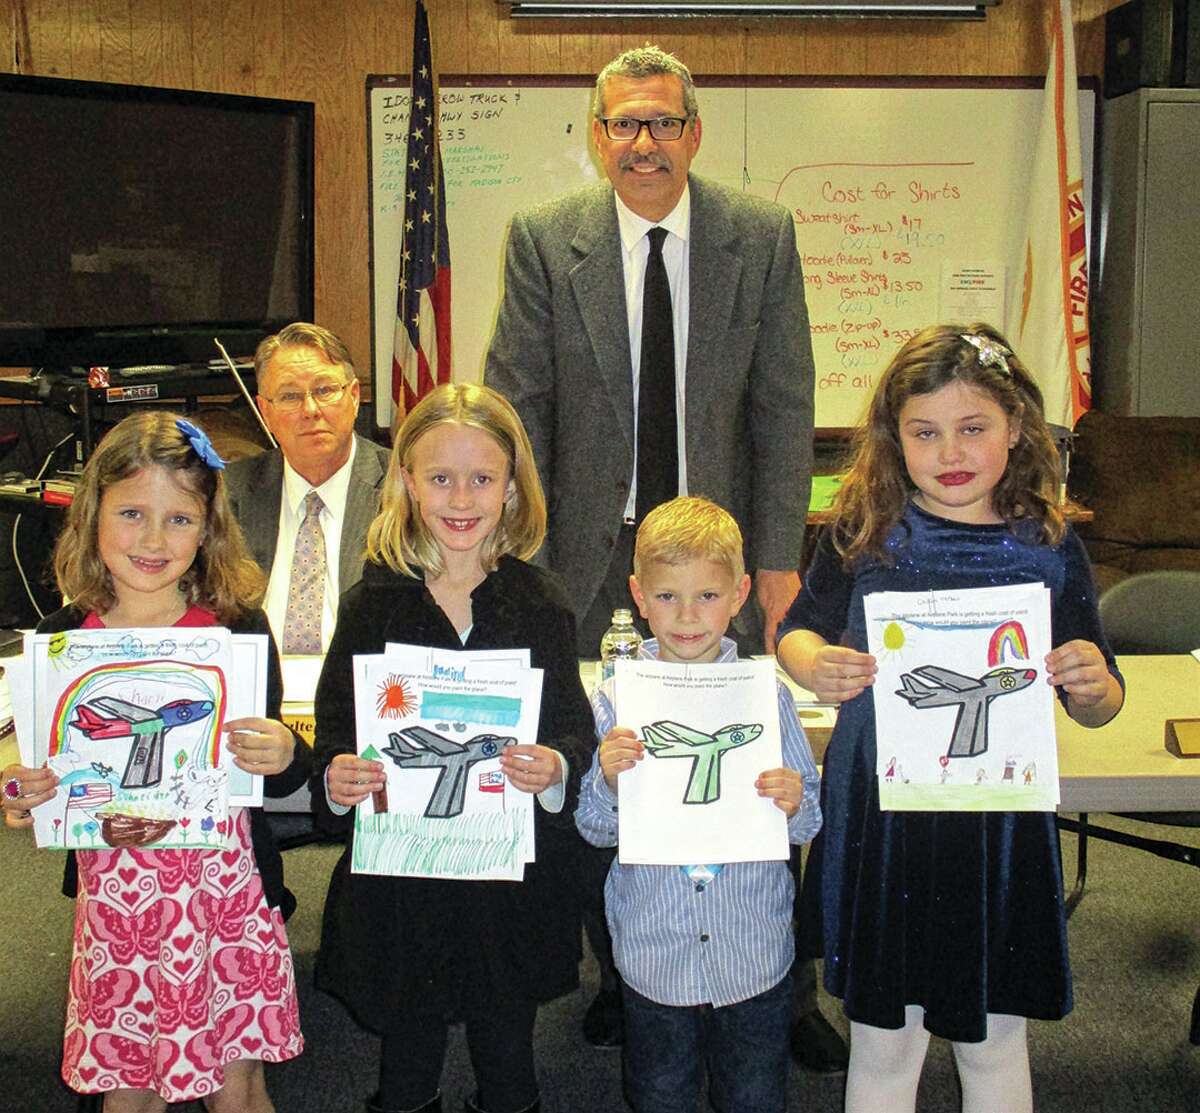 Supervisor Frank Miles presents certificates and prizes to winners of the Township in Action coloring contest: Charli Schneider, Rosalind Hovan, Michael Schumer, and Cecilia Verbais. Not pictured – Ben Keith.